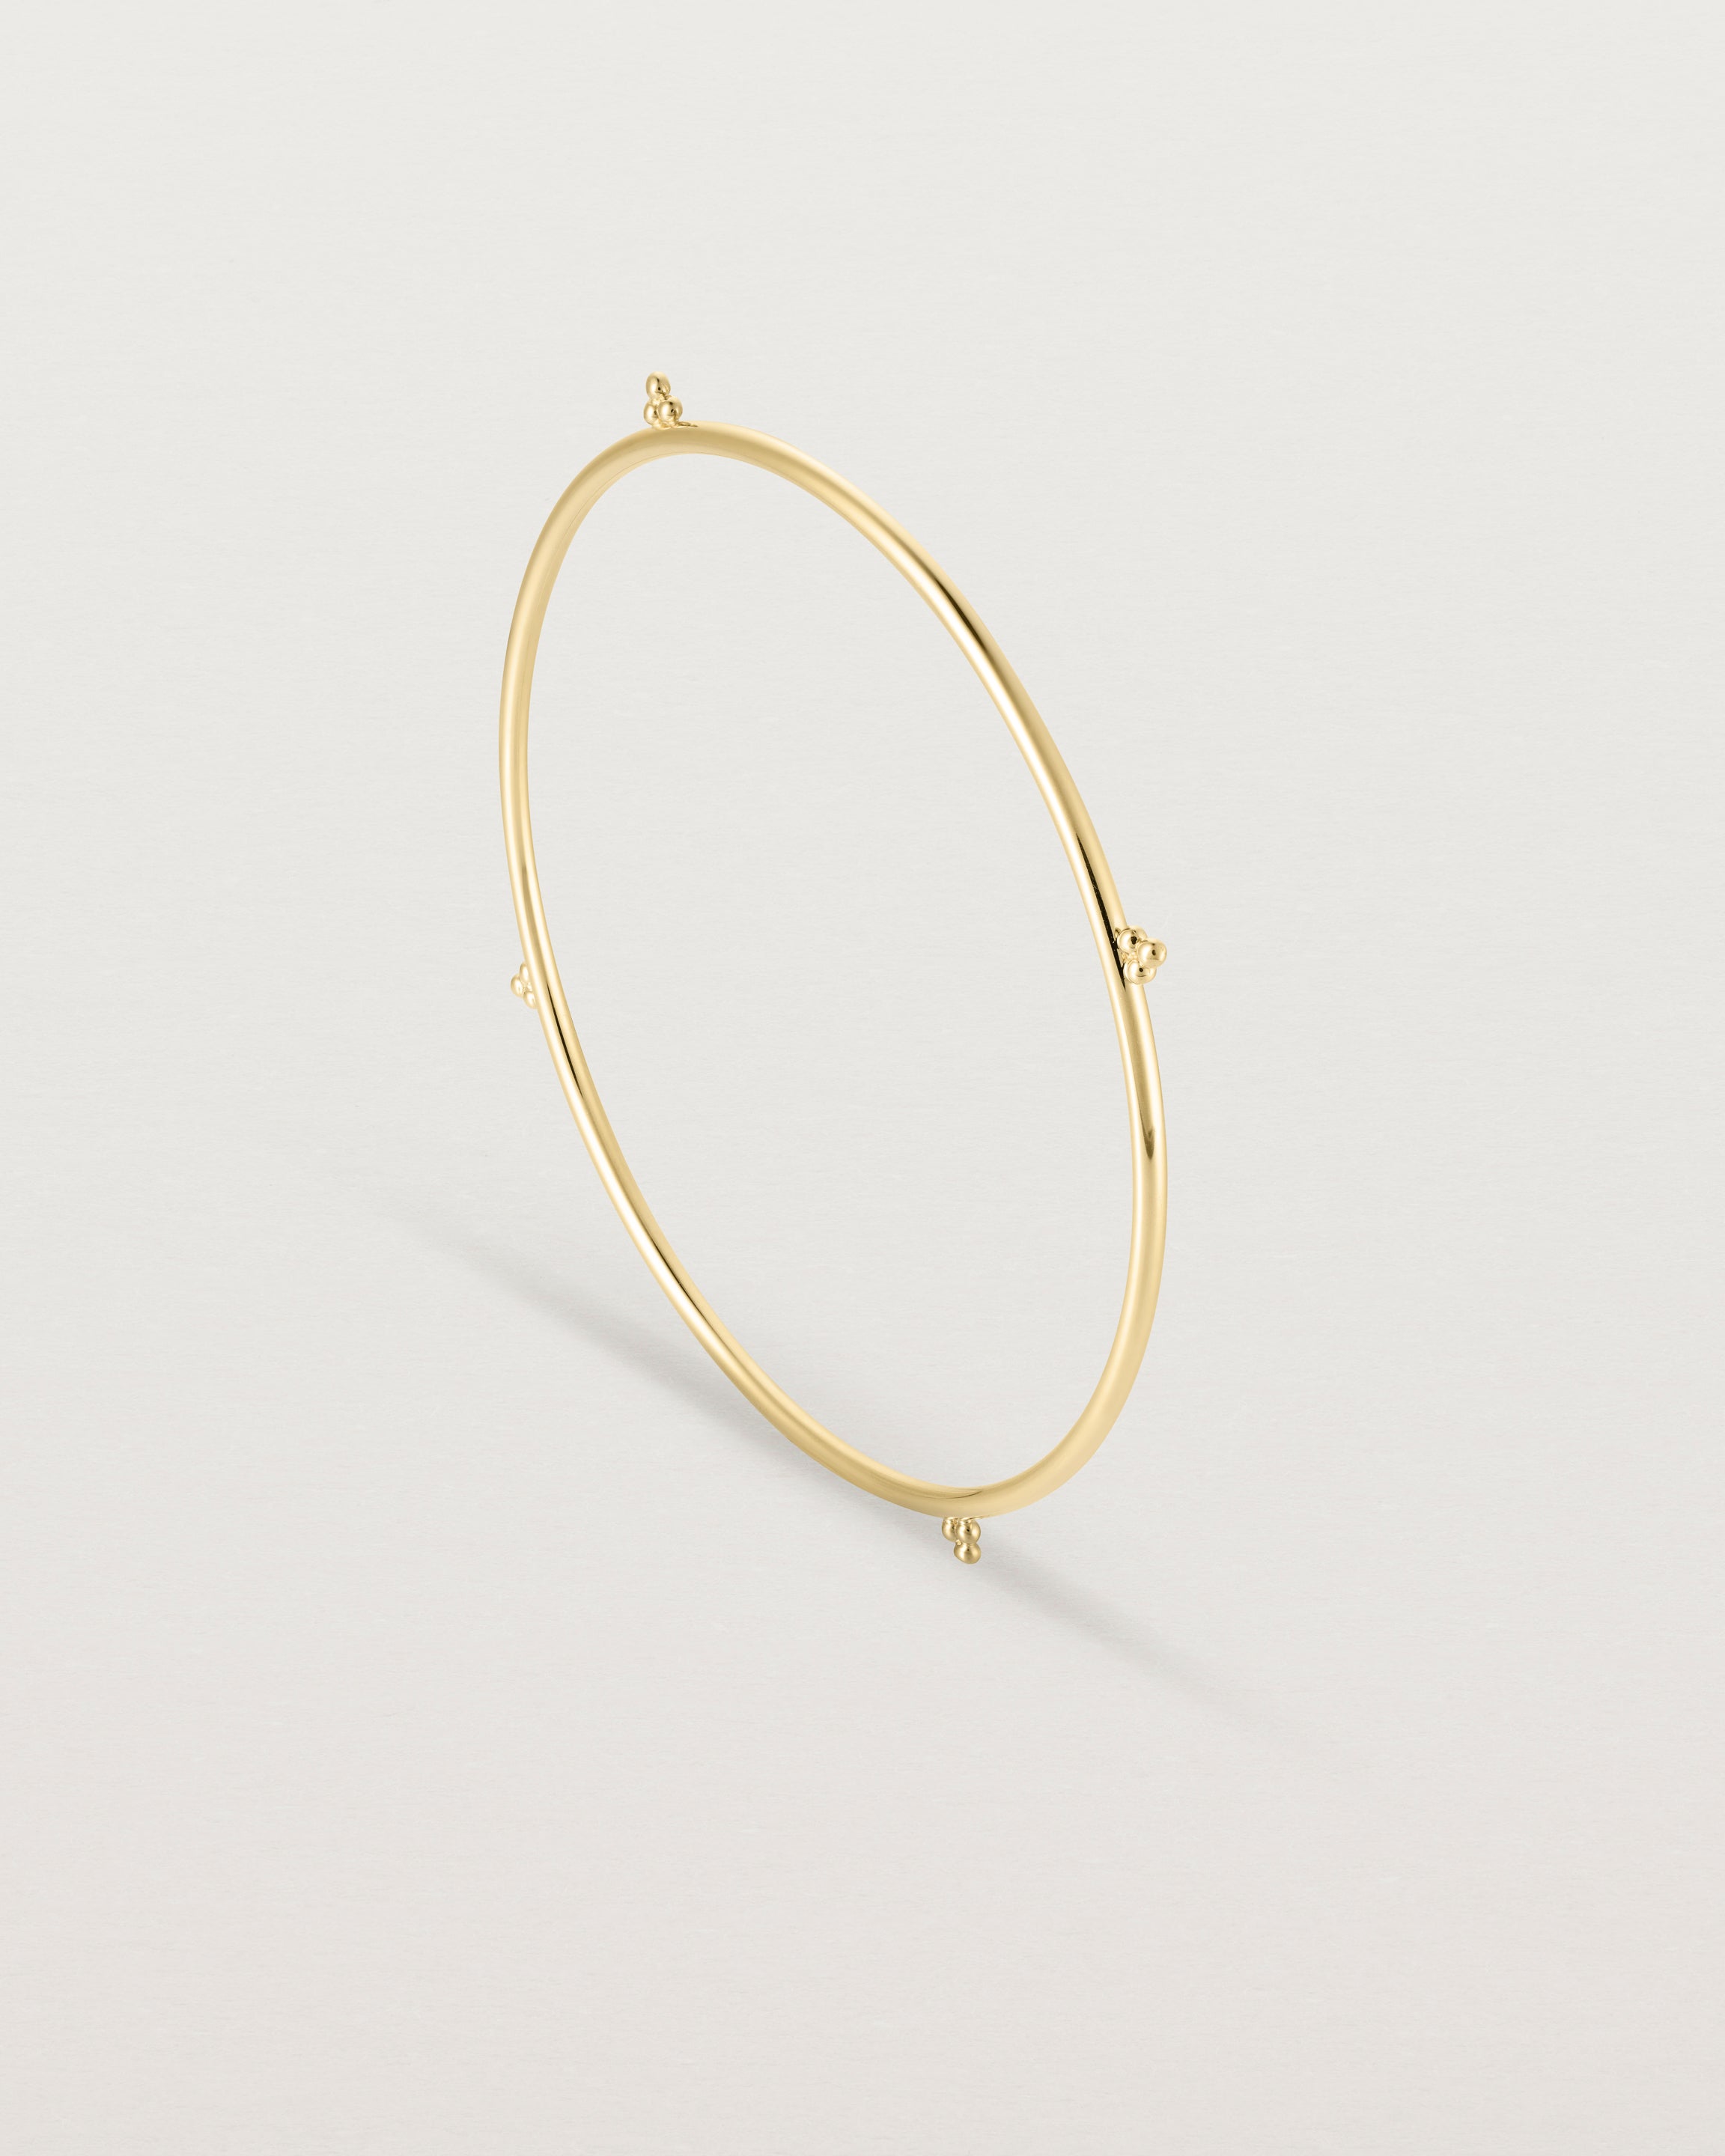 Standing view of the Alya Bangle in Yellow Gold.